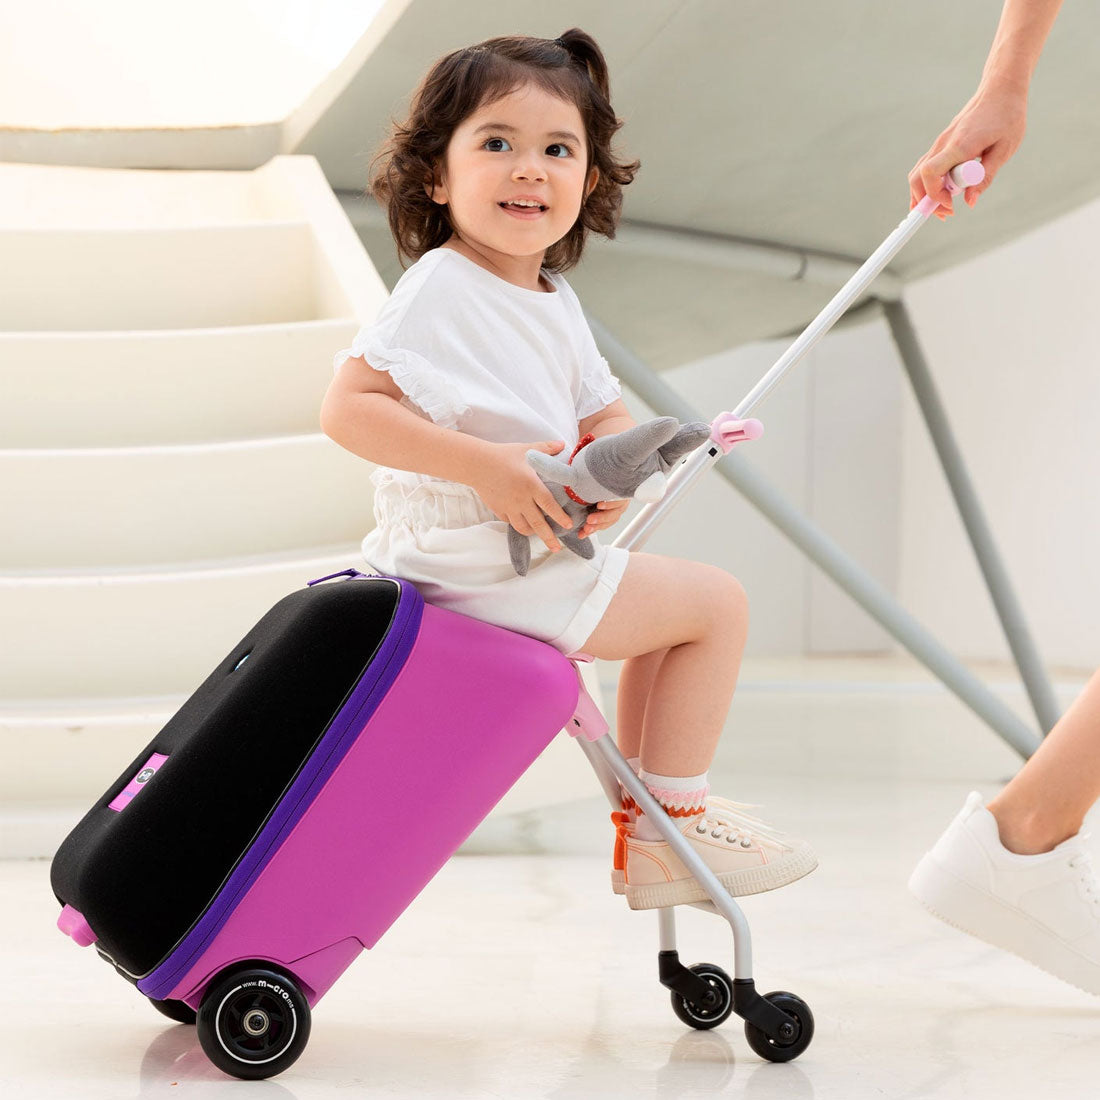 Micro Luggage Eazy - Violet Scooter Completes Rec